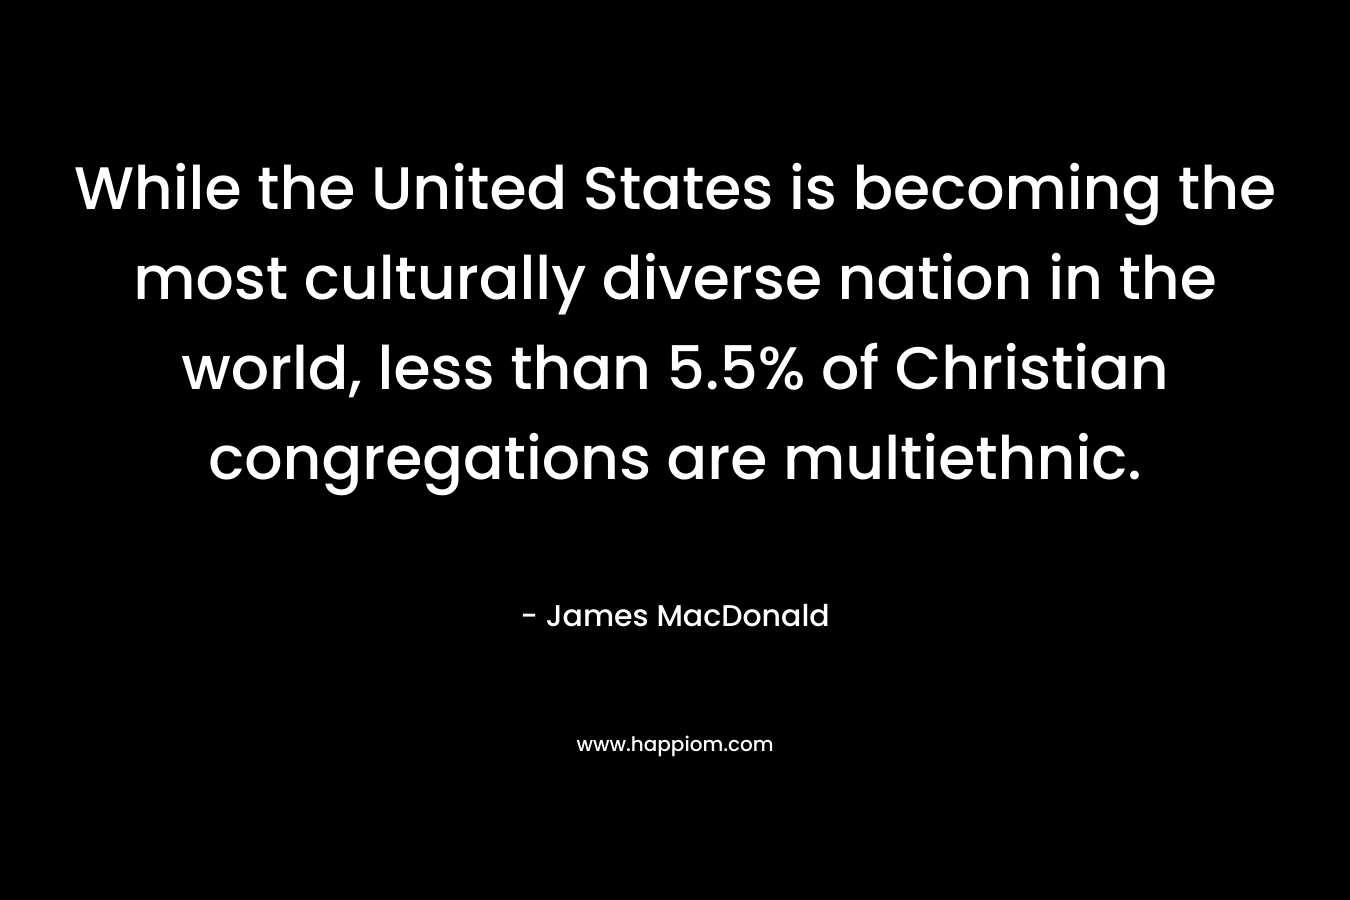 While the United States is becoming the most culturally diverse nation in the world, less than 5.5% of Christian congregations are multiethnic.